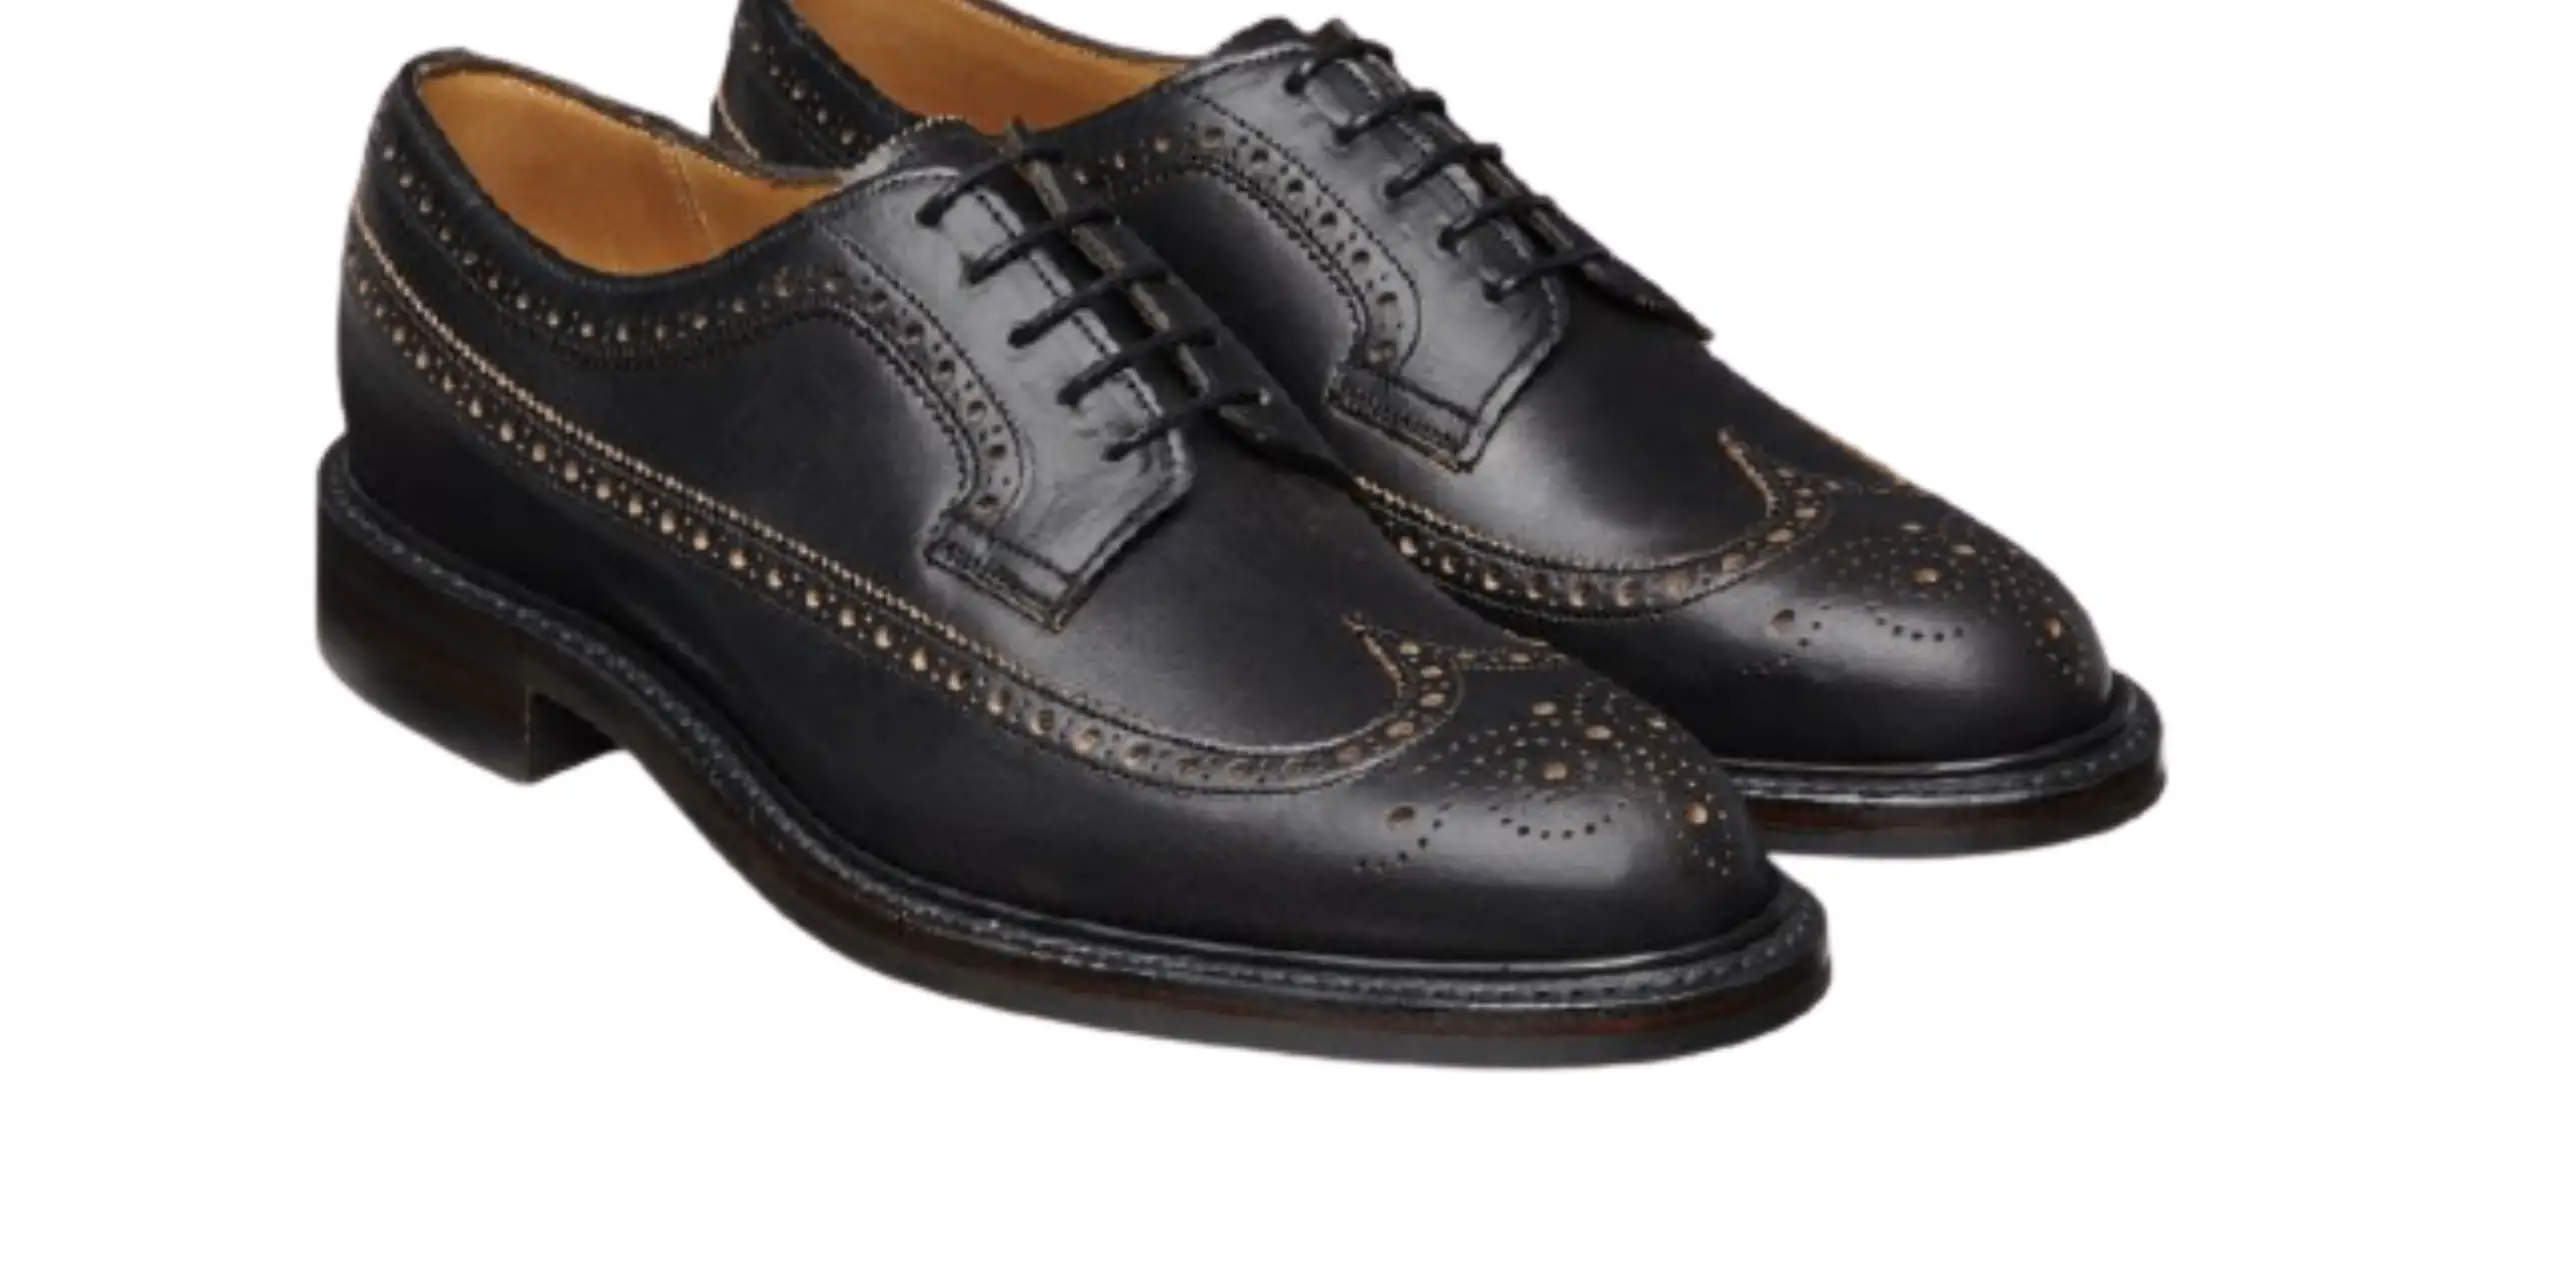 Longwing Brogue —Types of Men's Formal Shoes